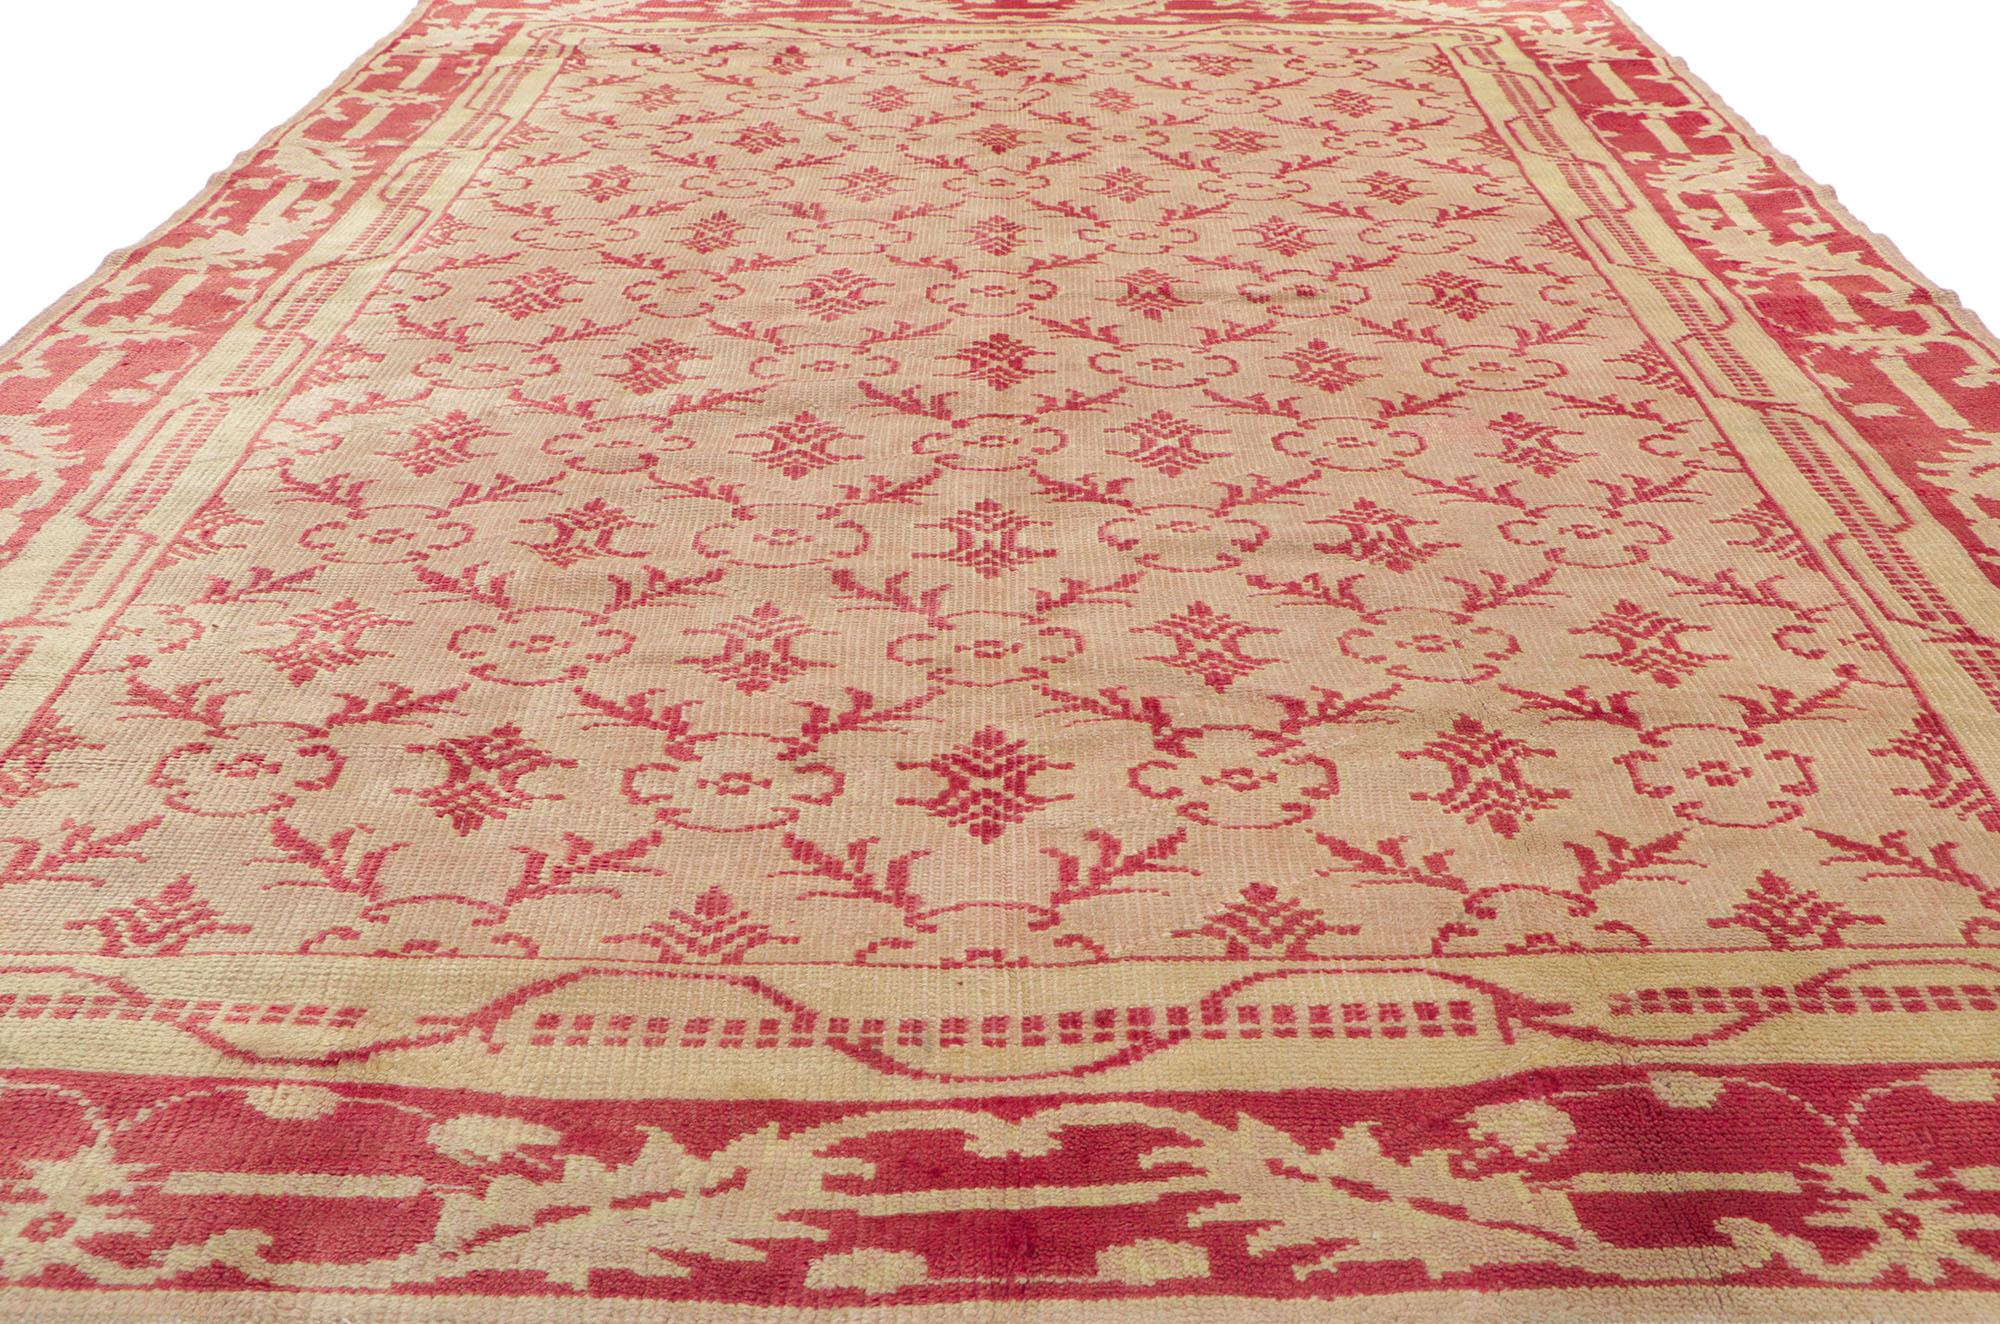 Vintage Turkish Oushak Rug with Lattice and Leaf Border, Traditional Style In Fair Condition For Sale In Dallas, TX